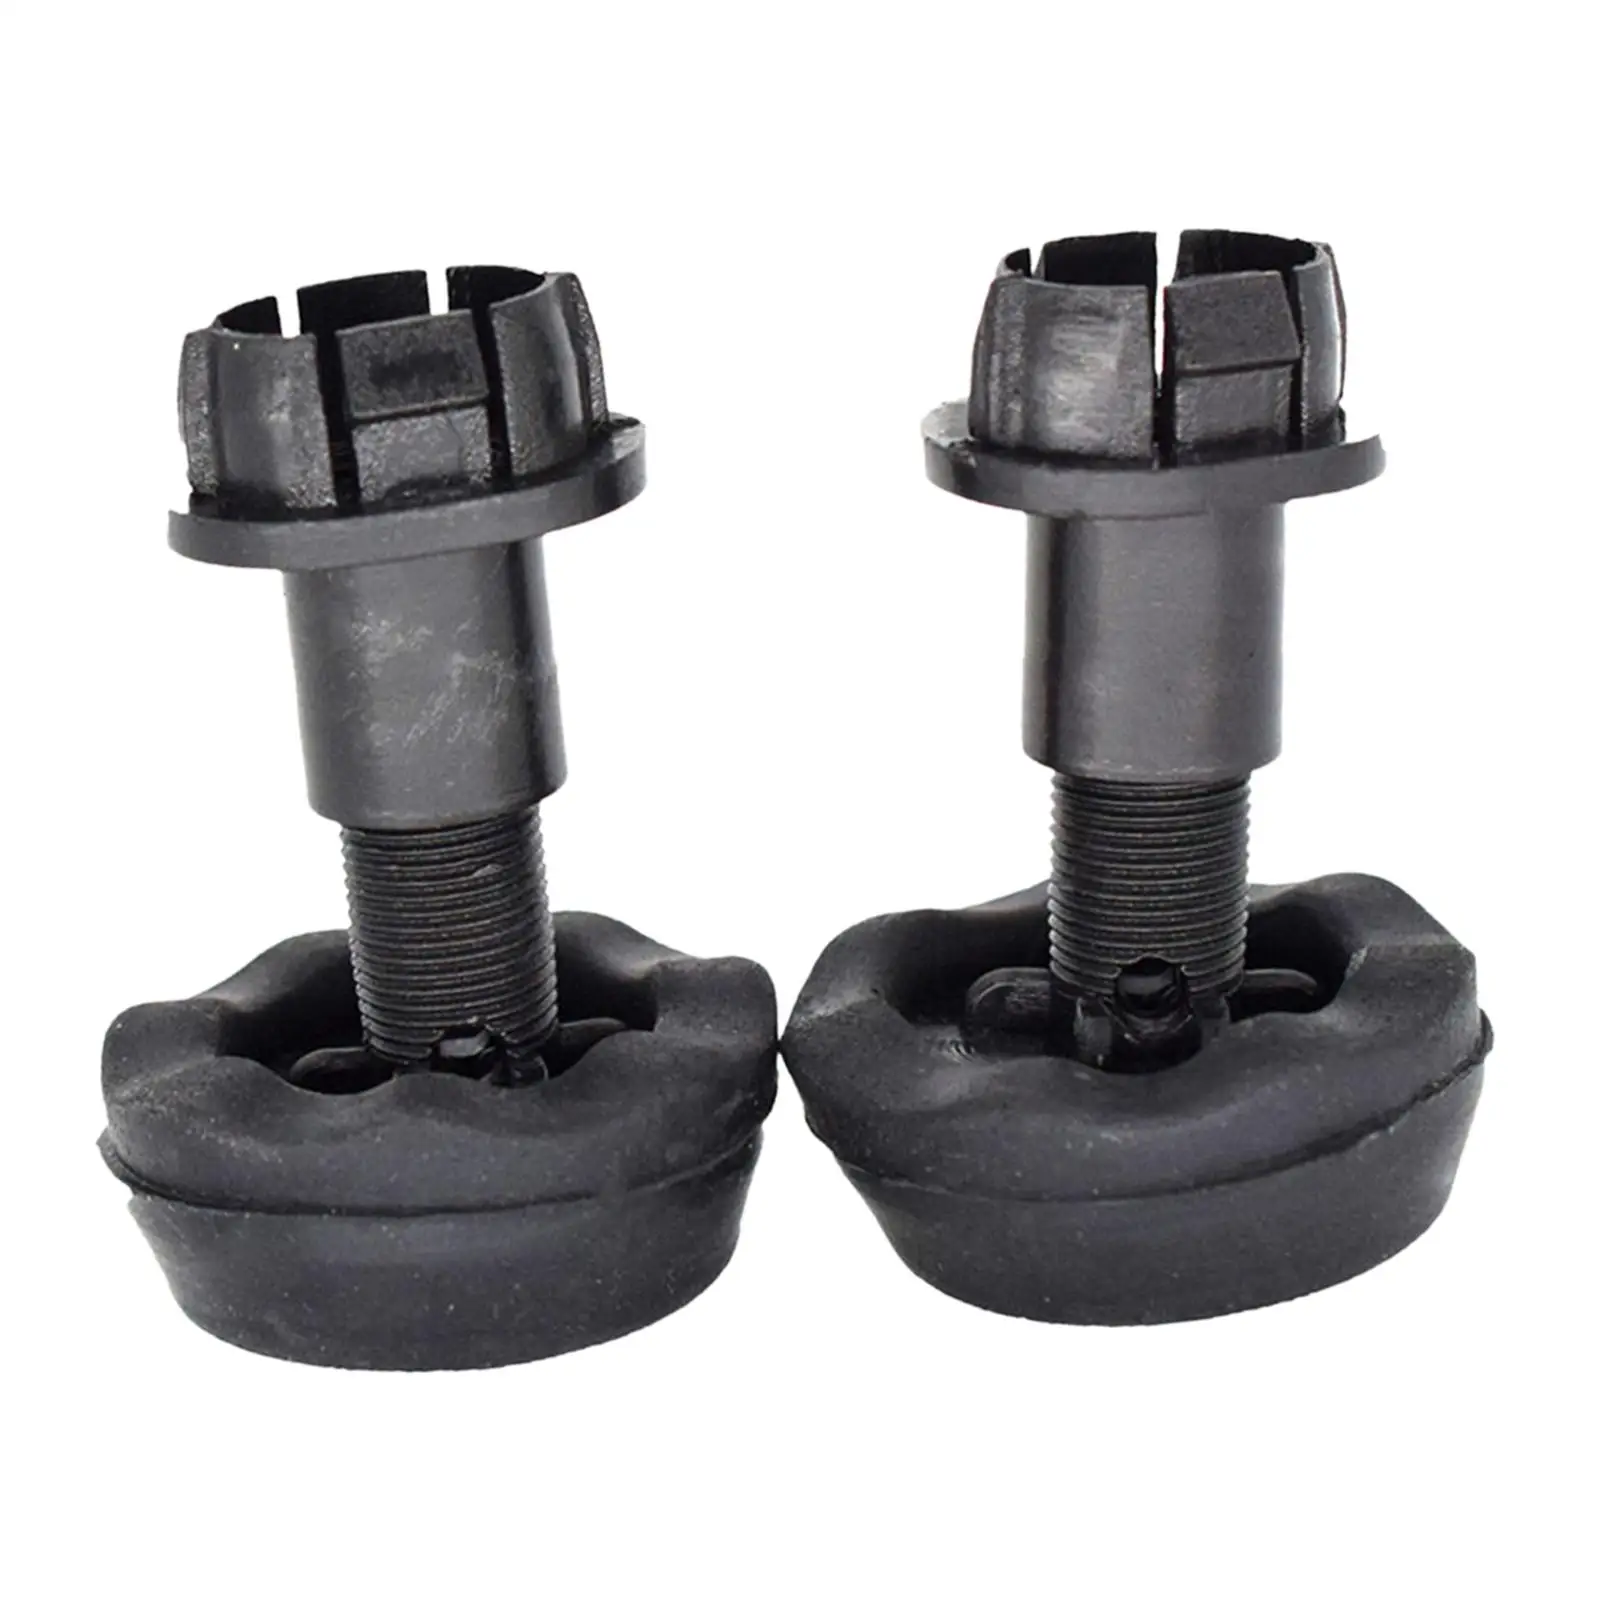 2x Durable Engine Cover Buffer Stop Cushion Accessories Auto for Mkc 2015-2019